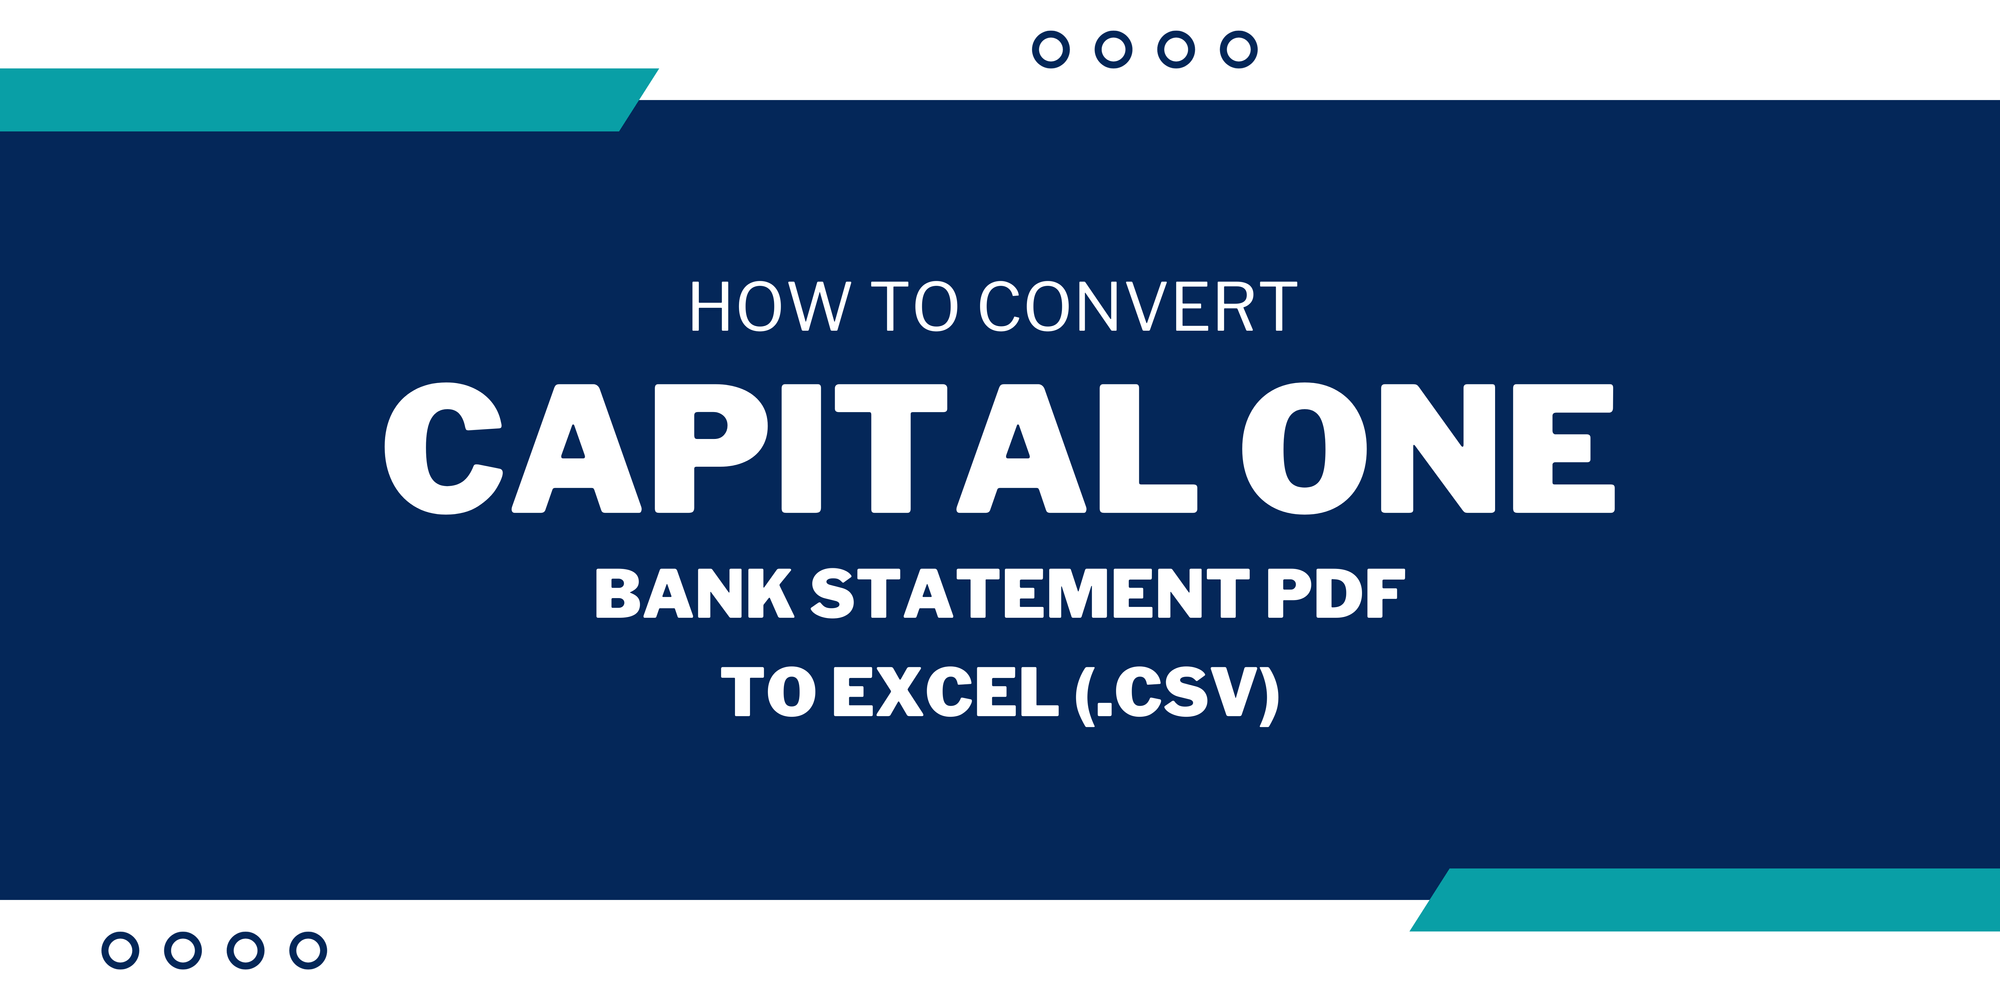 How to Convert Capital One Bank Statement PDF to Excel (.CSV)